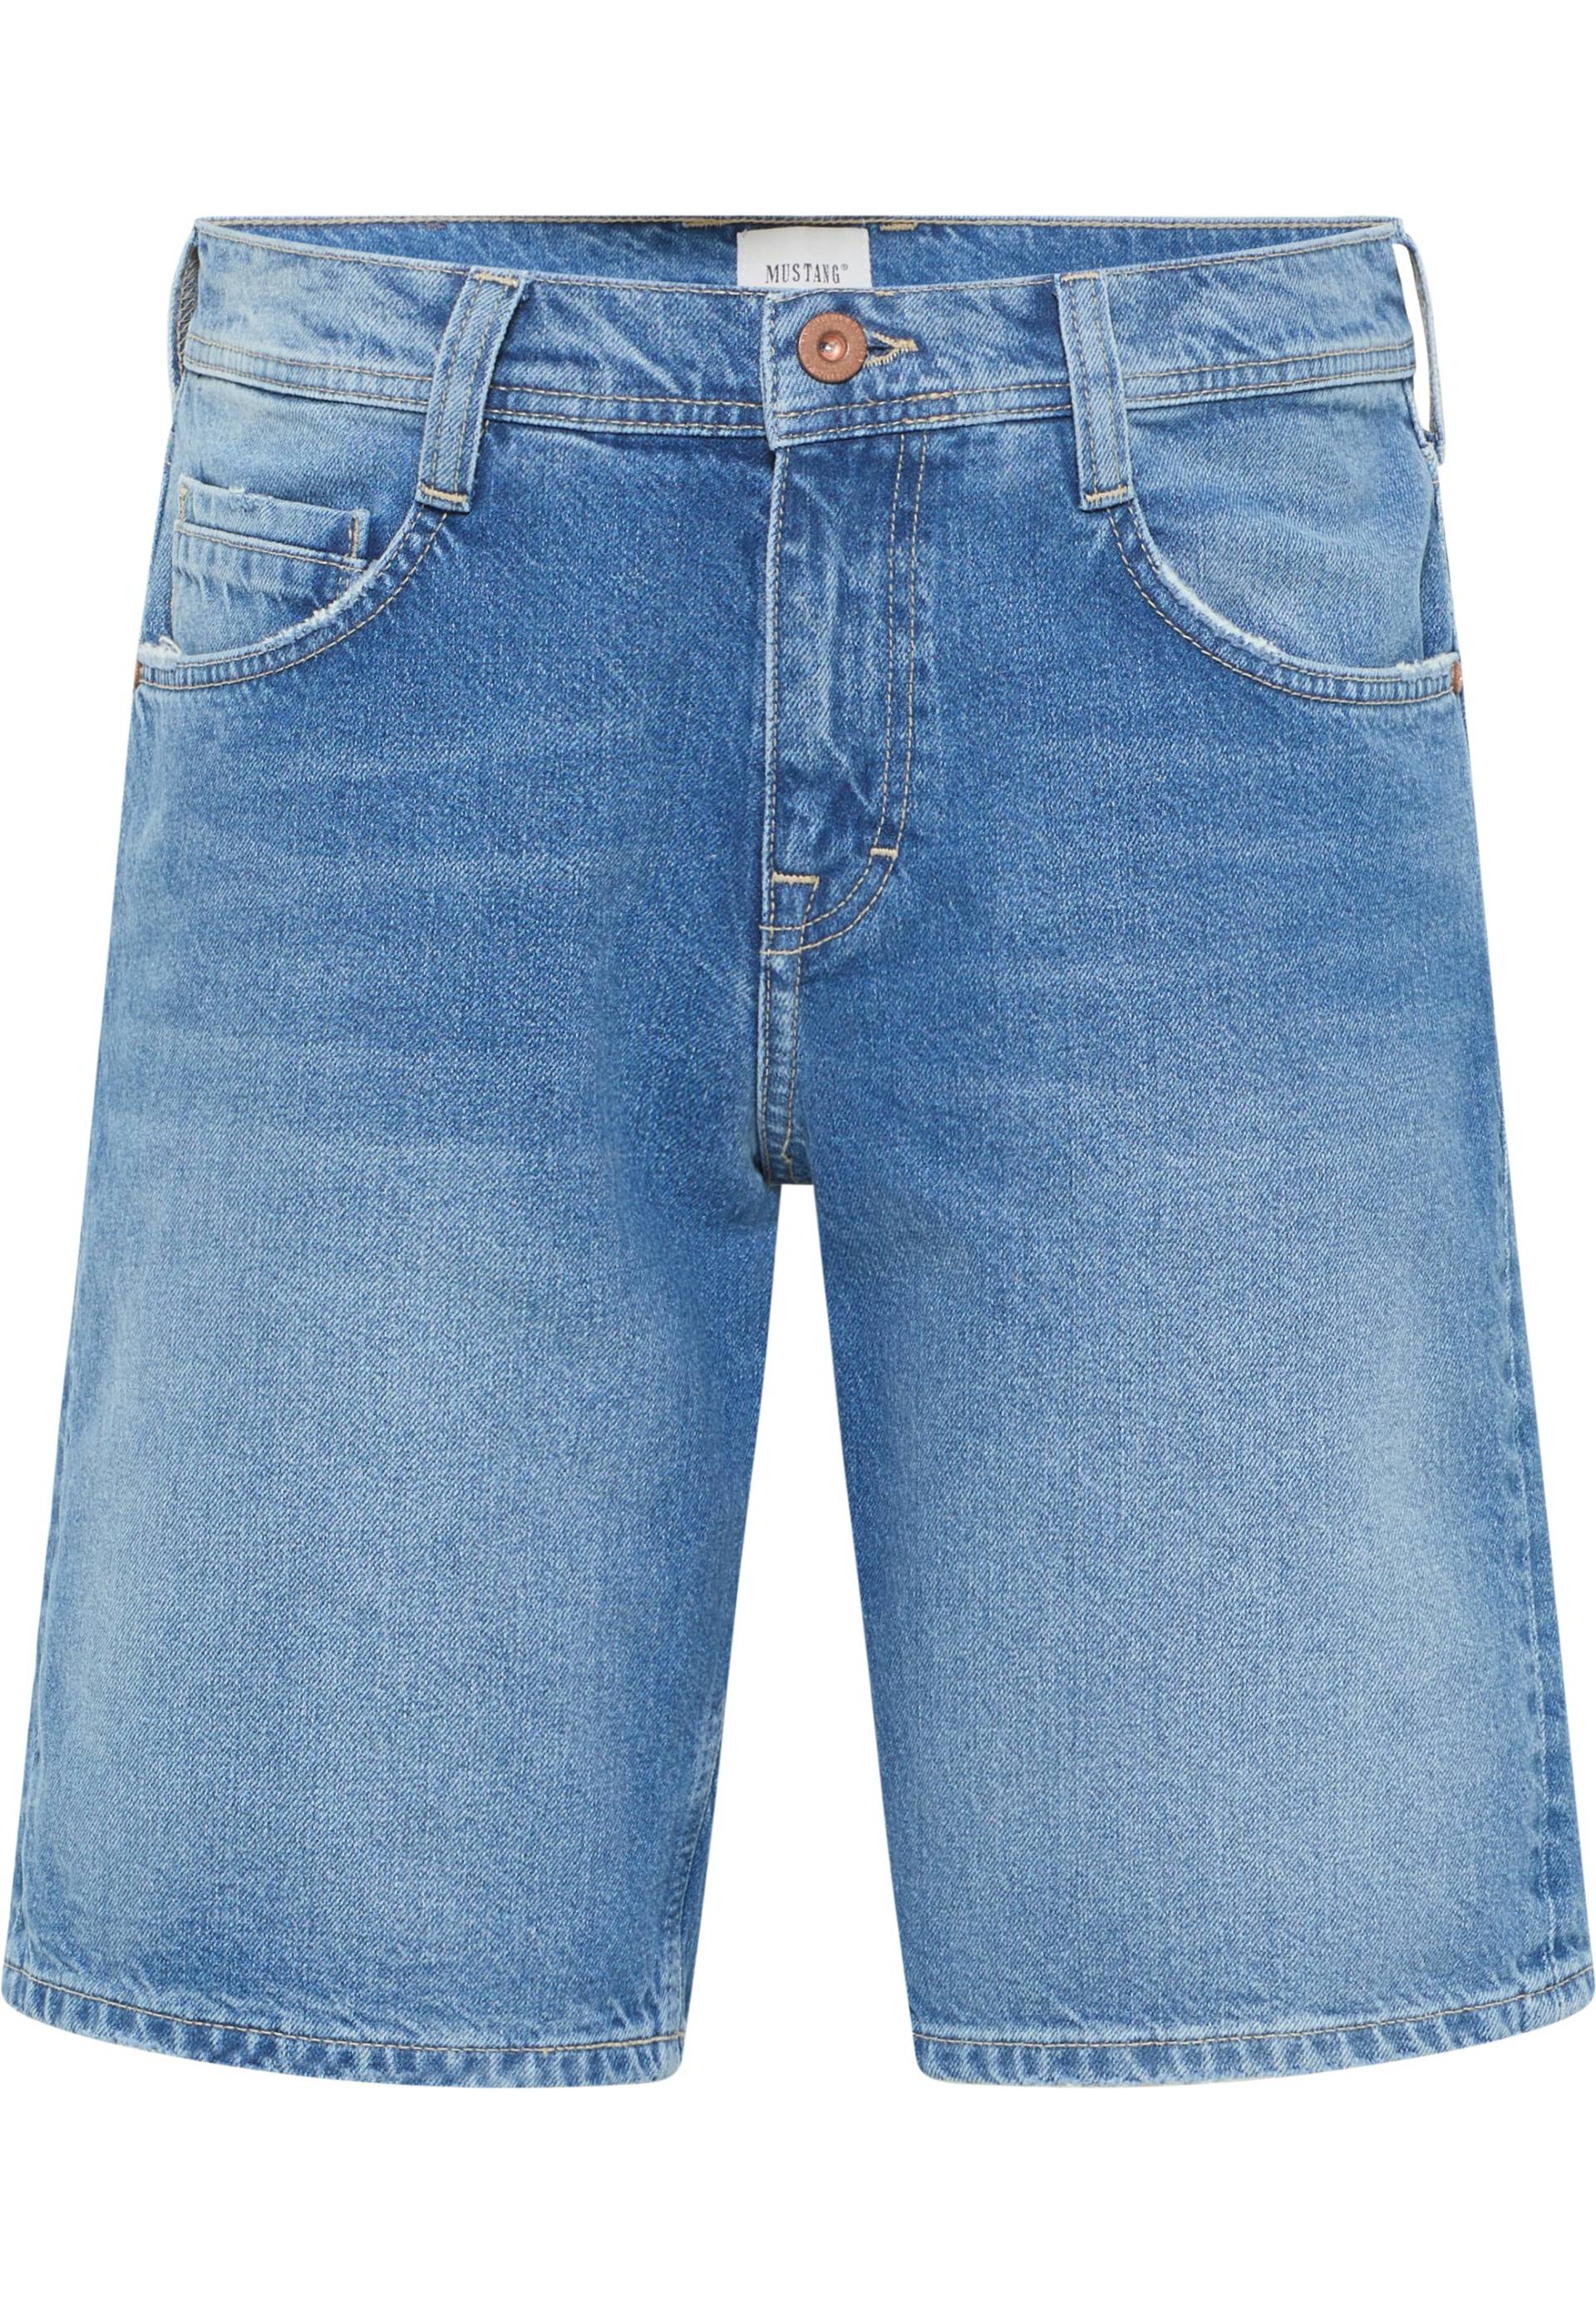 MUSTANG Slim-fit-Jeans »Style Denver Shorts« von Mustang